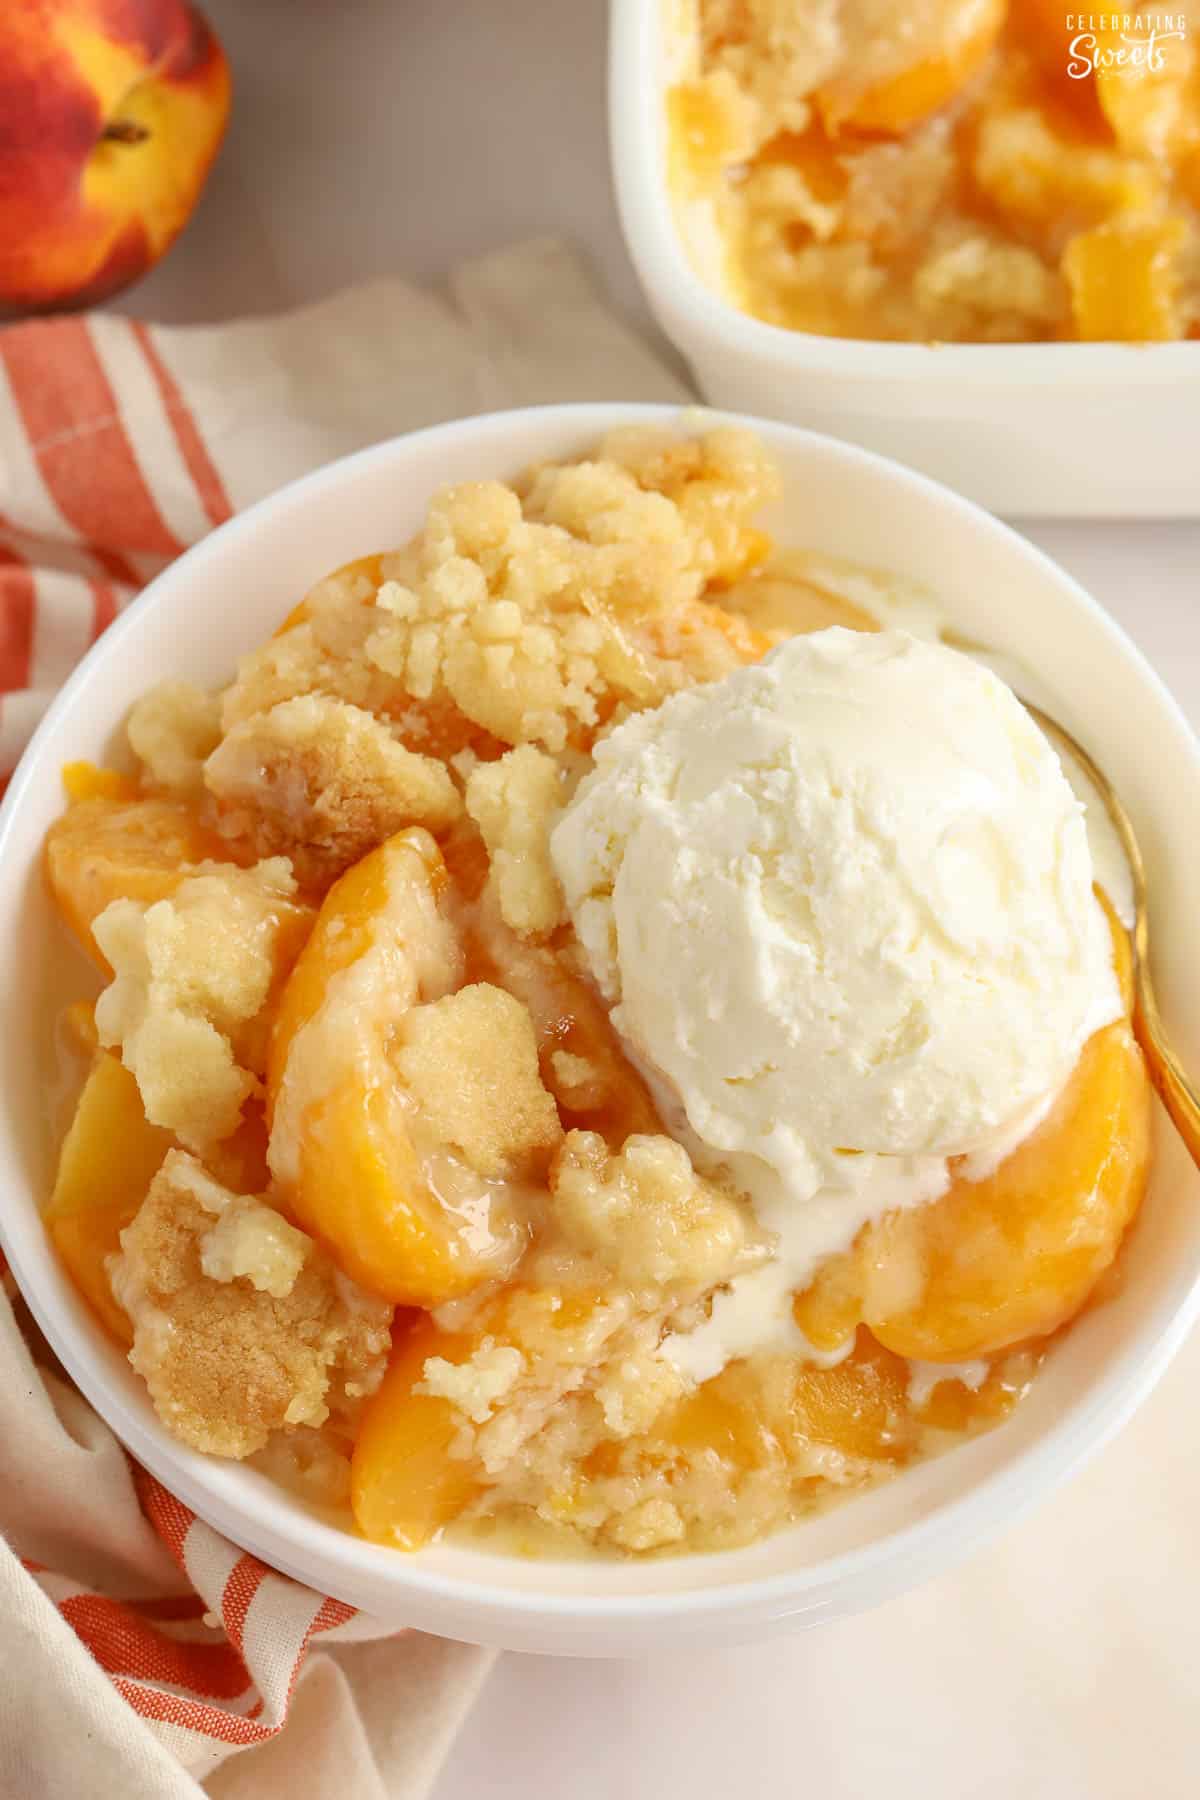 Peach Cobbler in a white bowl topped with a scoop of vanilla ice cream.